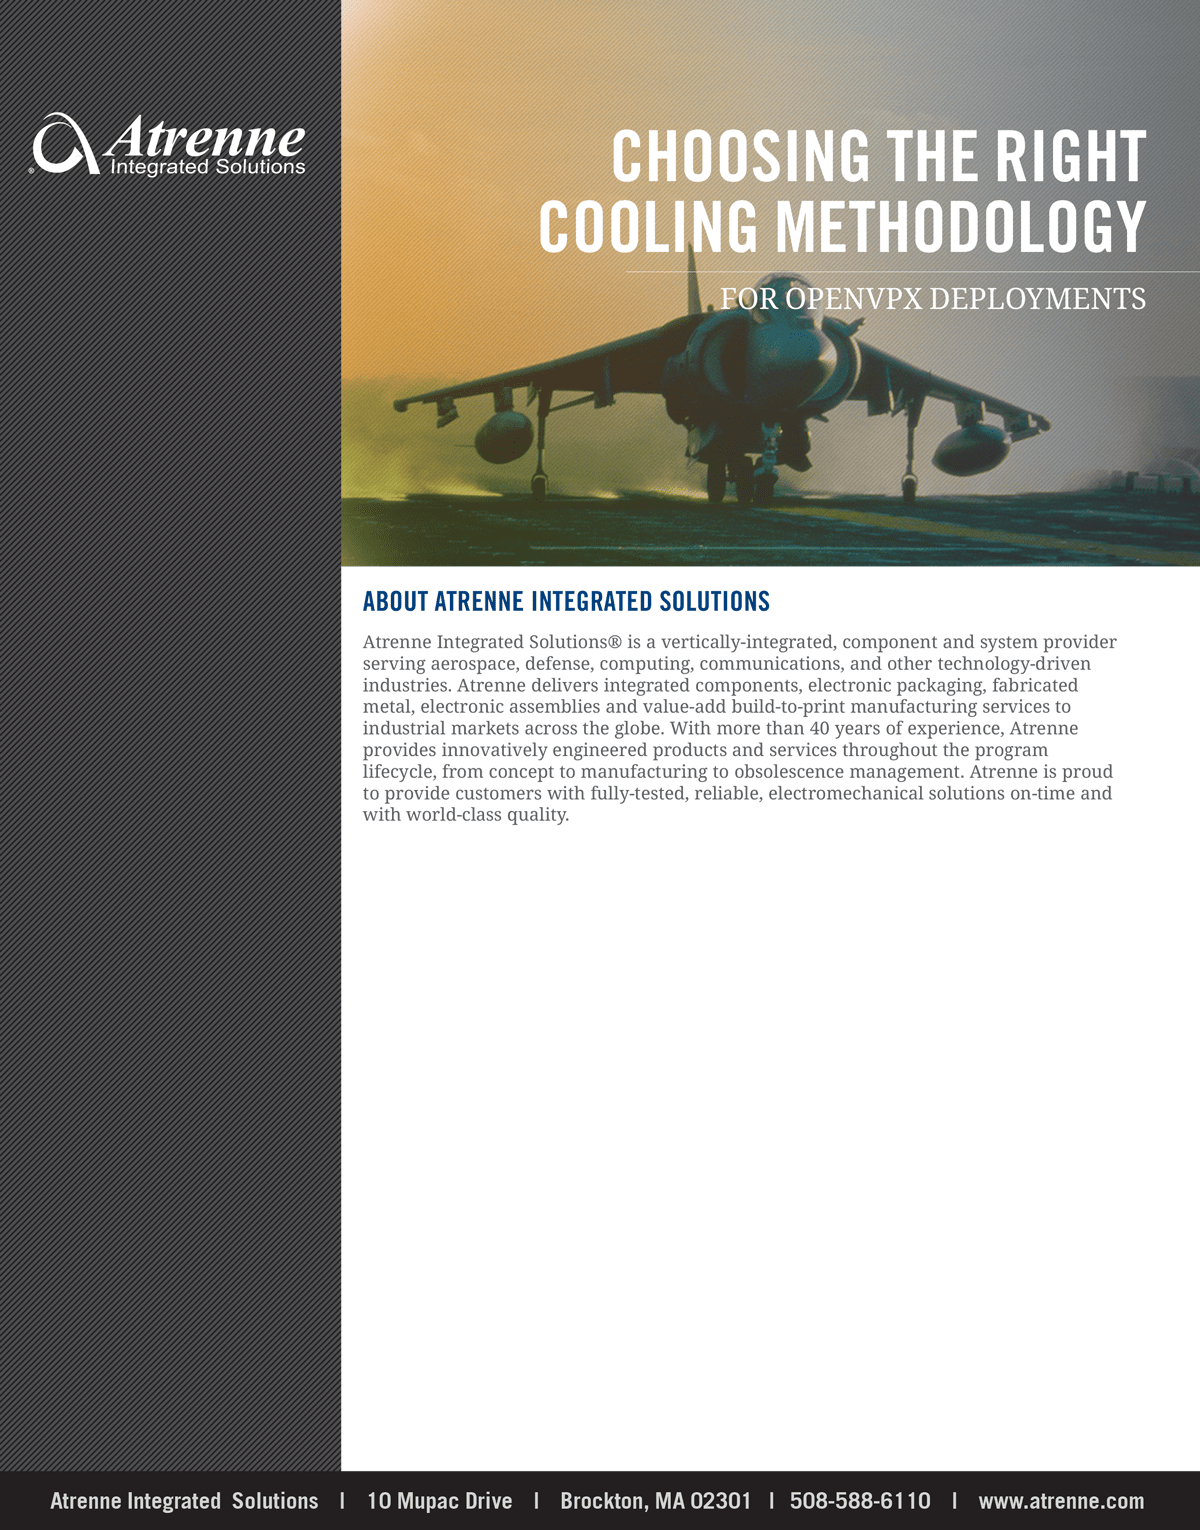 AIS-WP-Choosing-Cooling-Methodology-Front-Page-1200px-610624.png